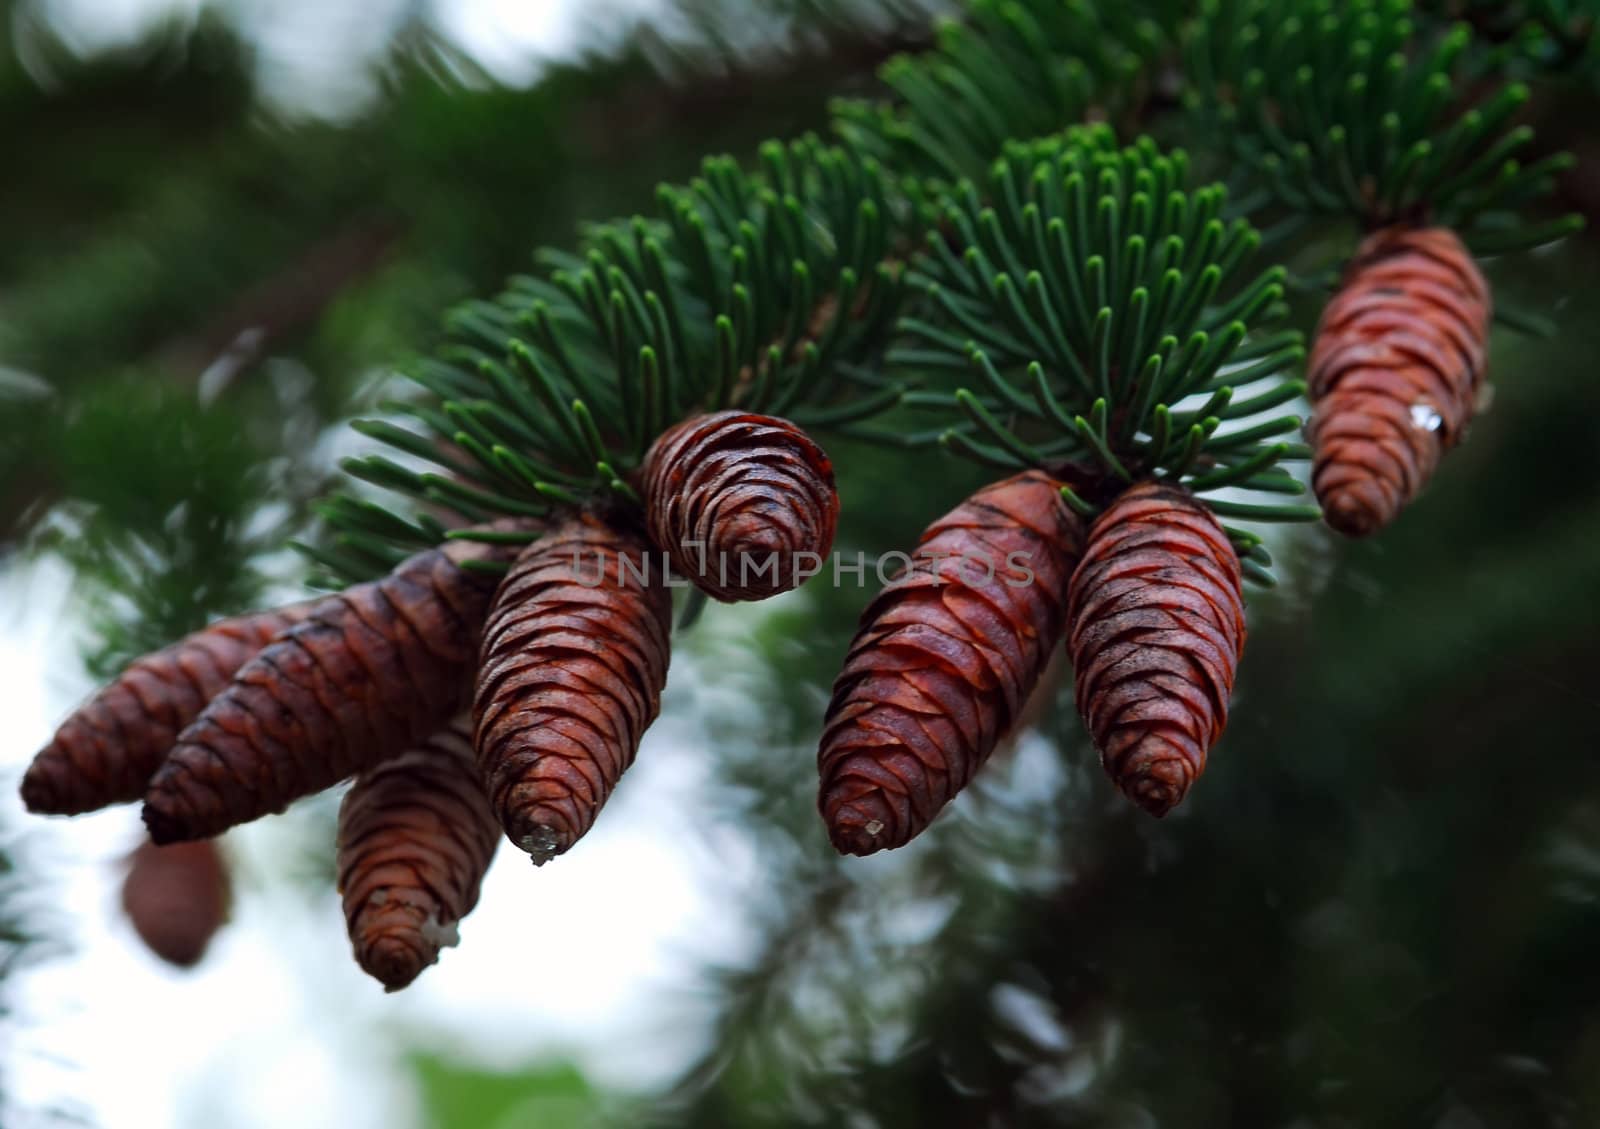 A close-up picture of some cones on their branches